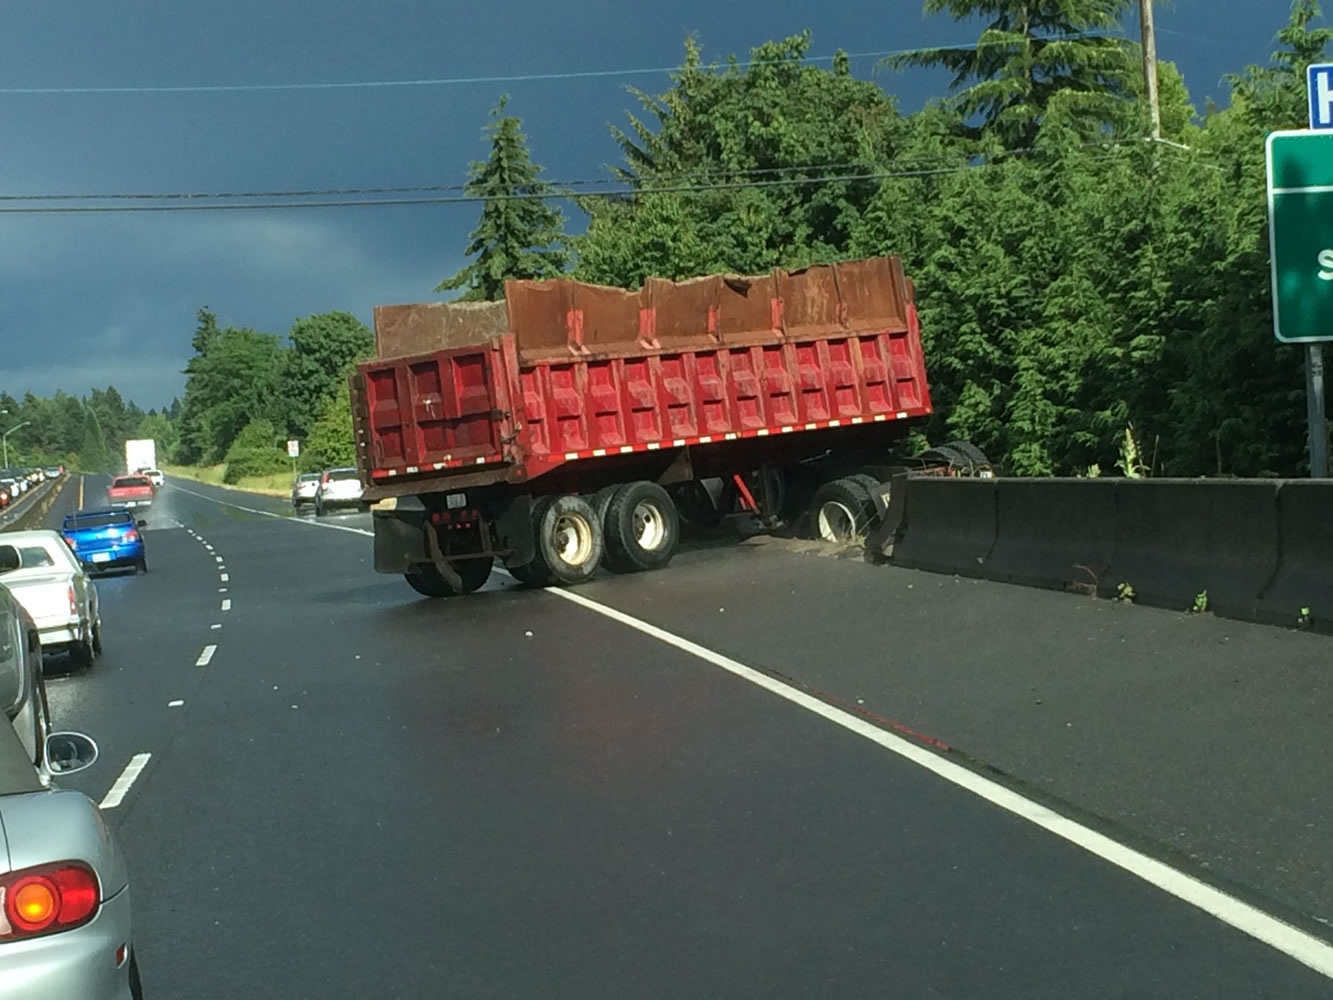 A tractor-trailer crash clogged traffic today for evening commuters in the eastbound lanes of state Highway 14 near Evergreen Boulevard.